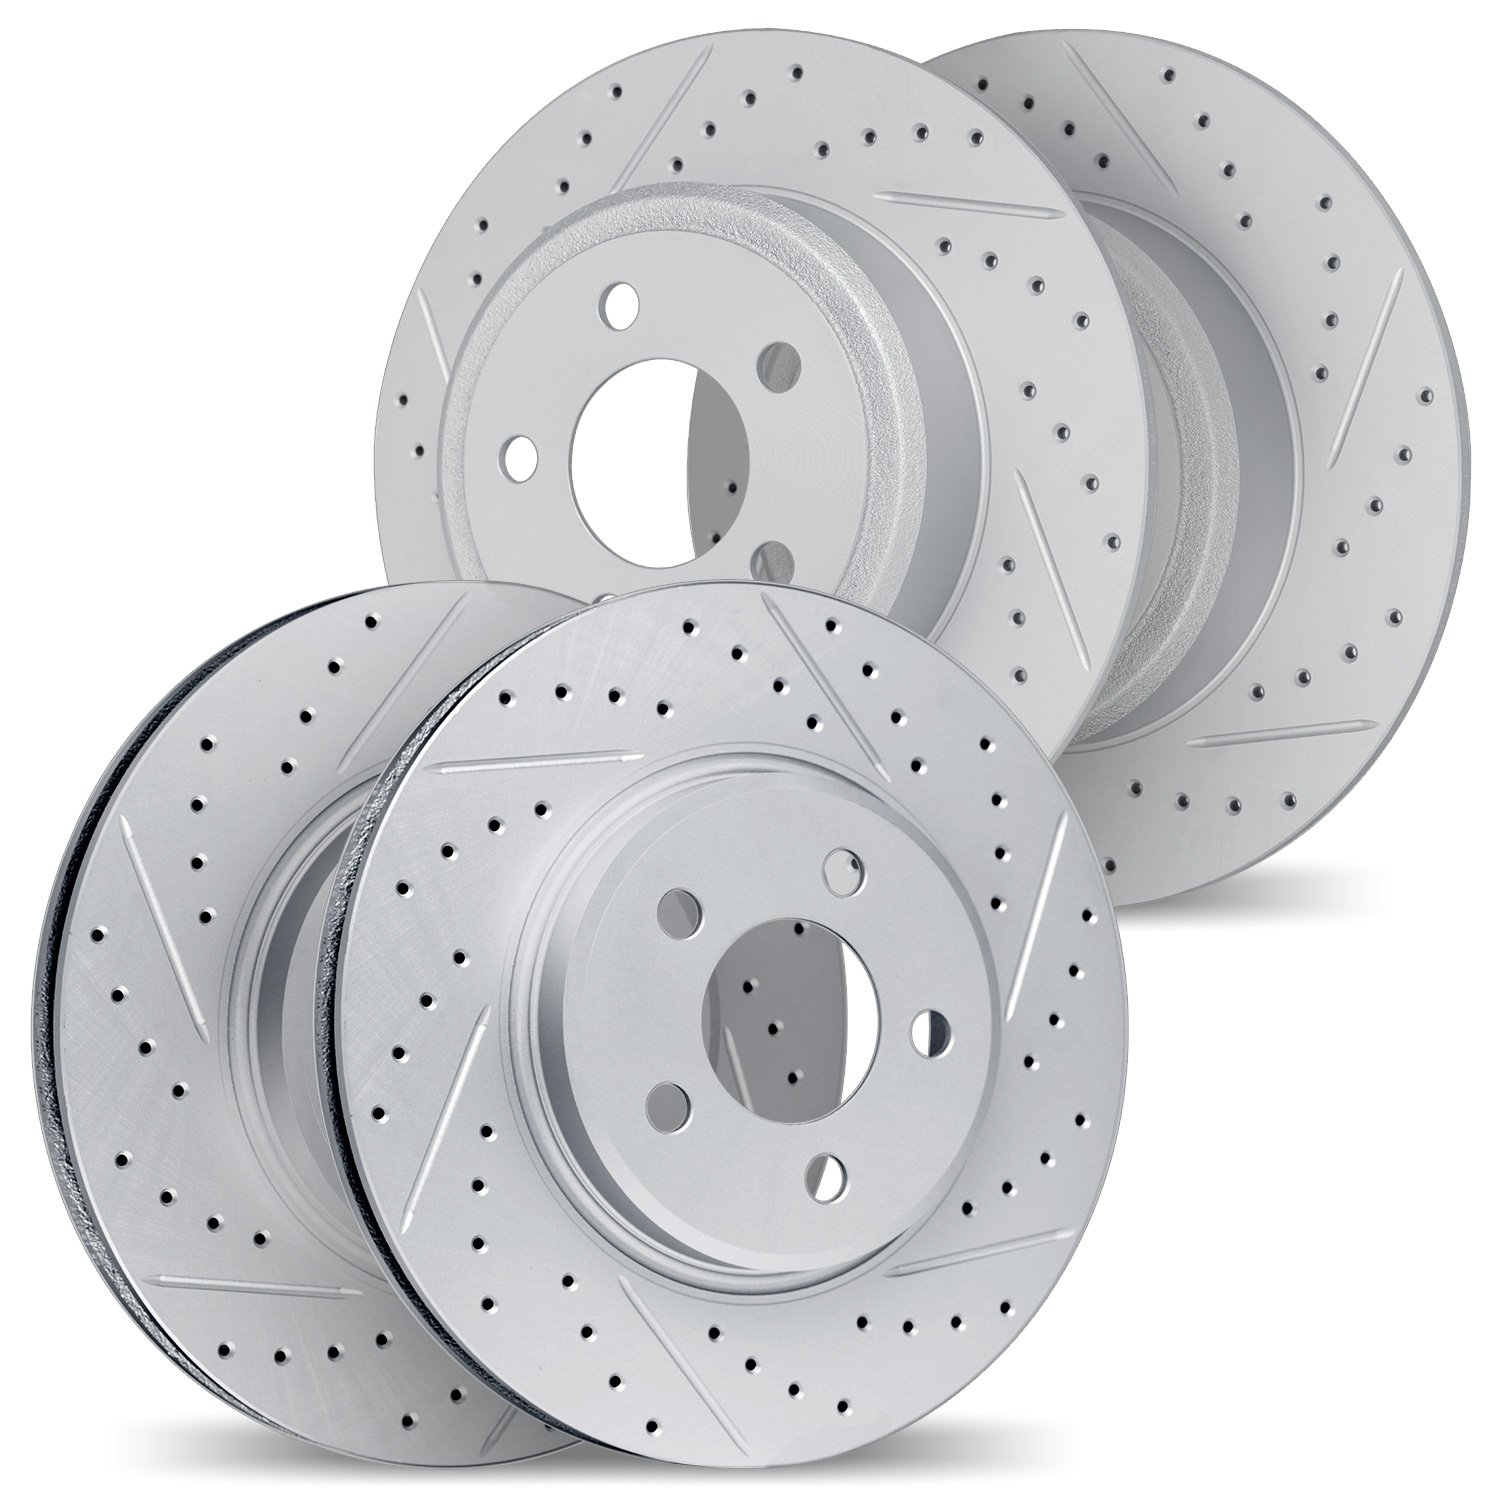 2004-76065 Geoperformance Drilled/Slotted Brake Rotors, 2006-2018 Lexus/Toyota/Scion, Position: Front and Rear